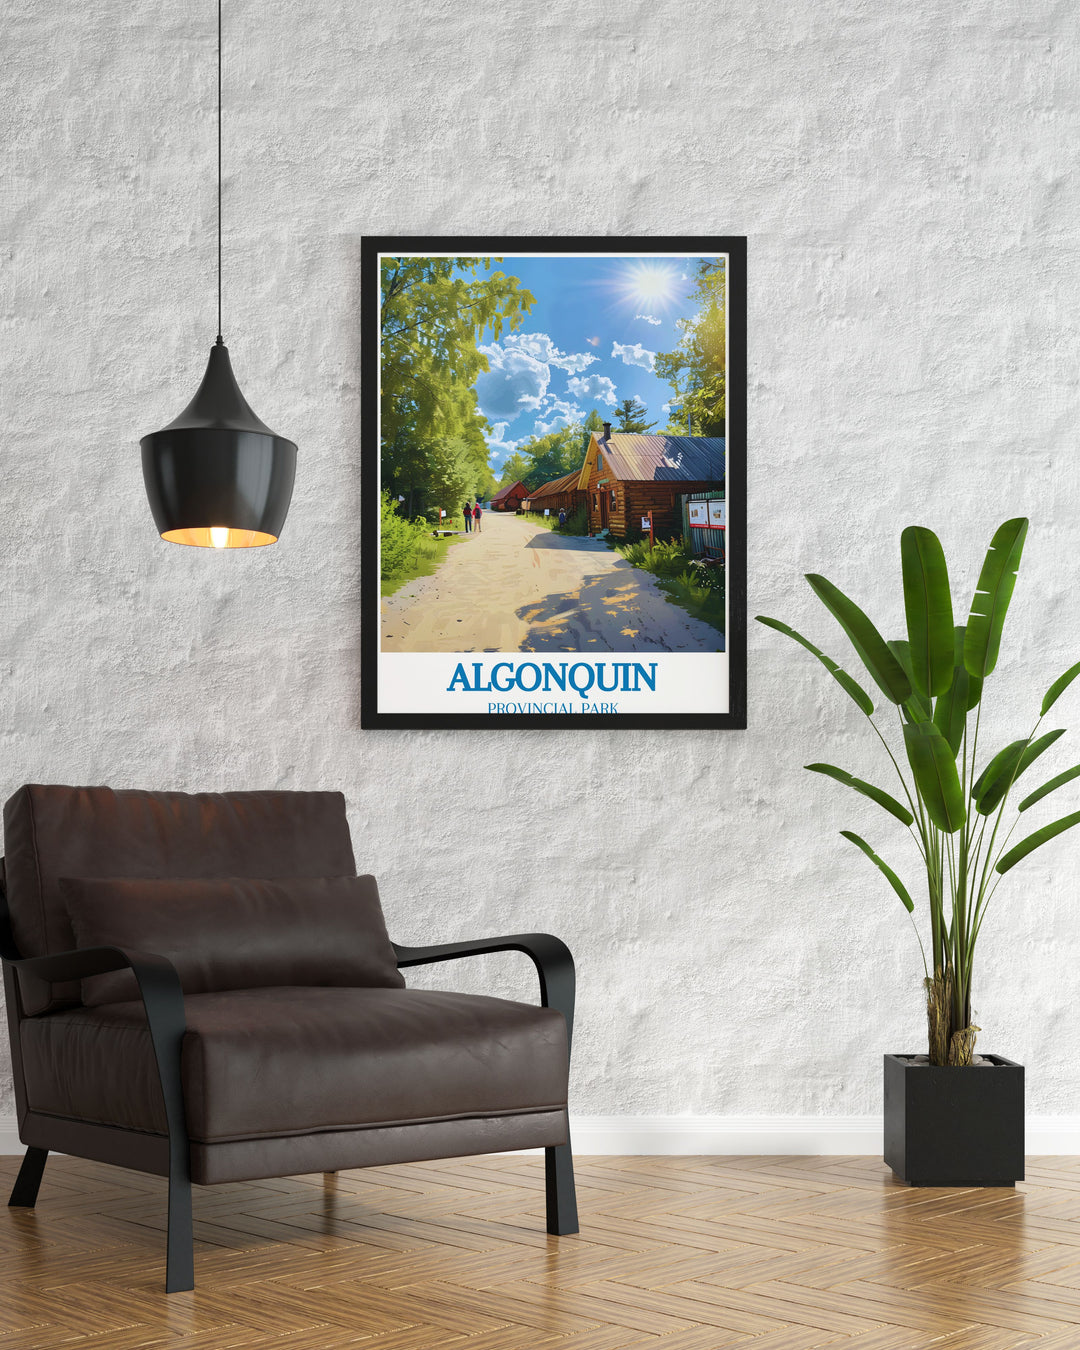 Experience the beauty of Canadas Algonquin Provincial Park with this fine art print, featuring the Algonquin Logging Museum amidst the parks lush greenery and tranquil waters, making it an ideal piece for Canada travel prints.